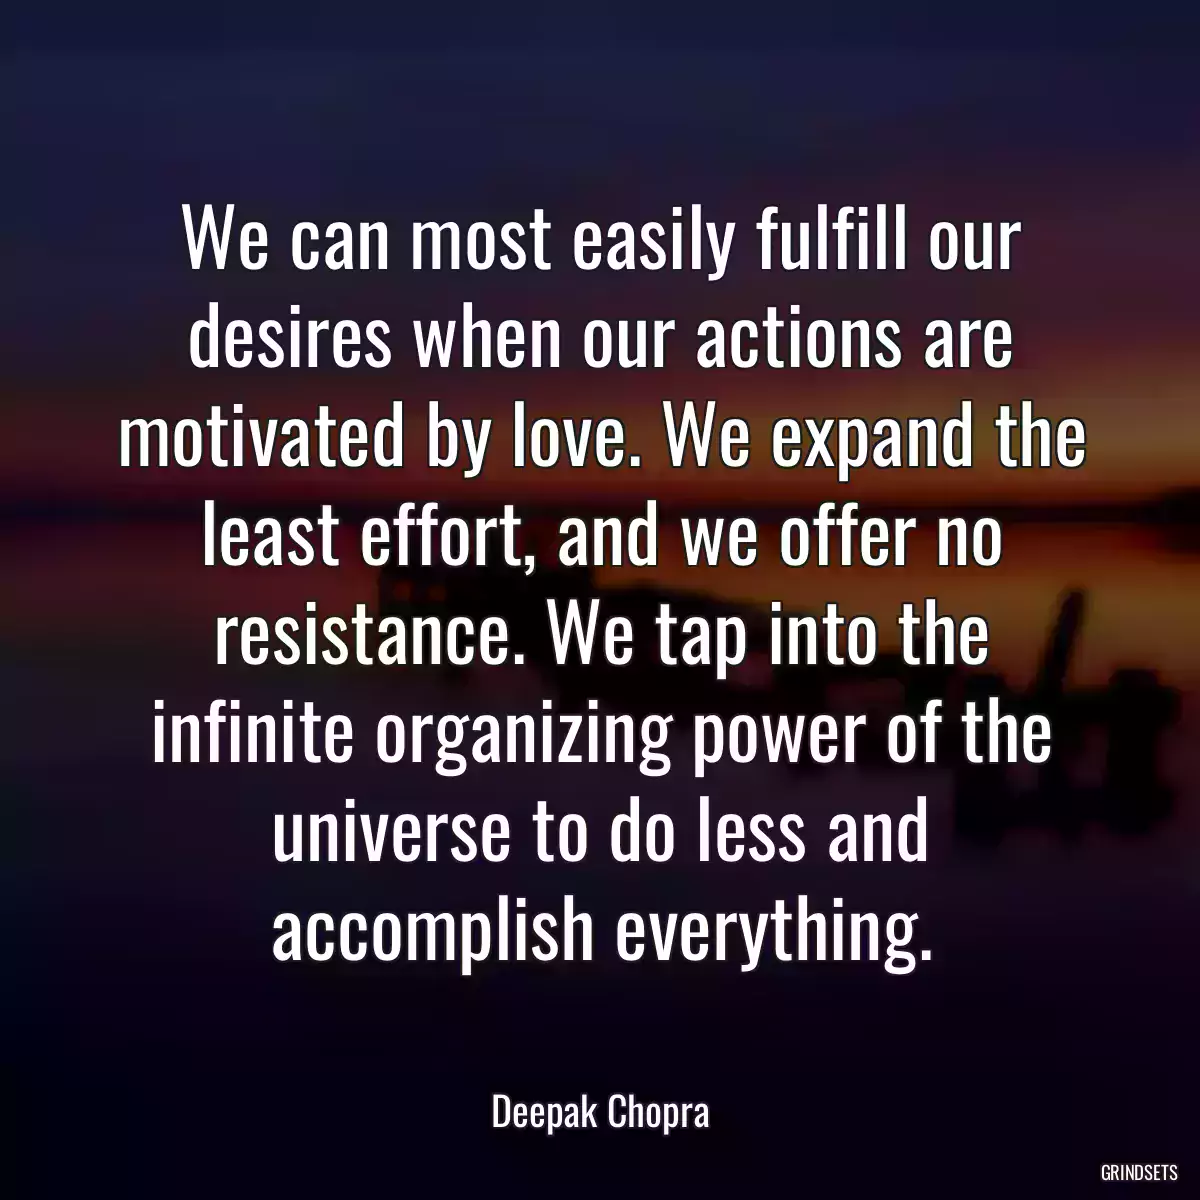 We can most easily fulfill our desires when our actions are motivated by love. We expand the least effort, and we offer no resistance. We tap into the infinite organizing power of the universe to do less and accomplish everything.